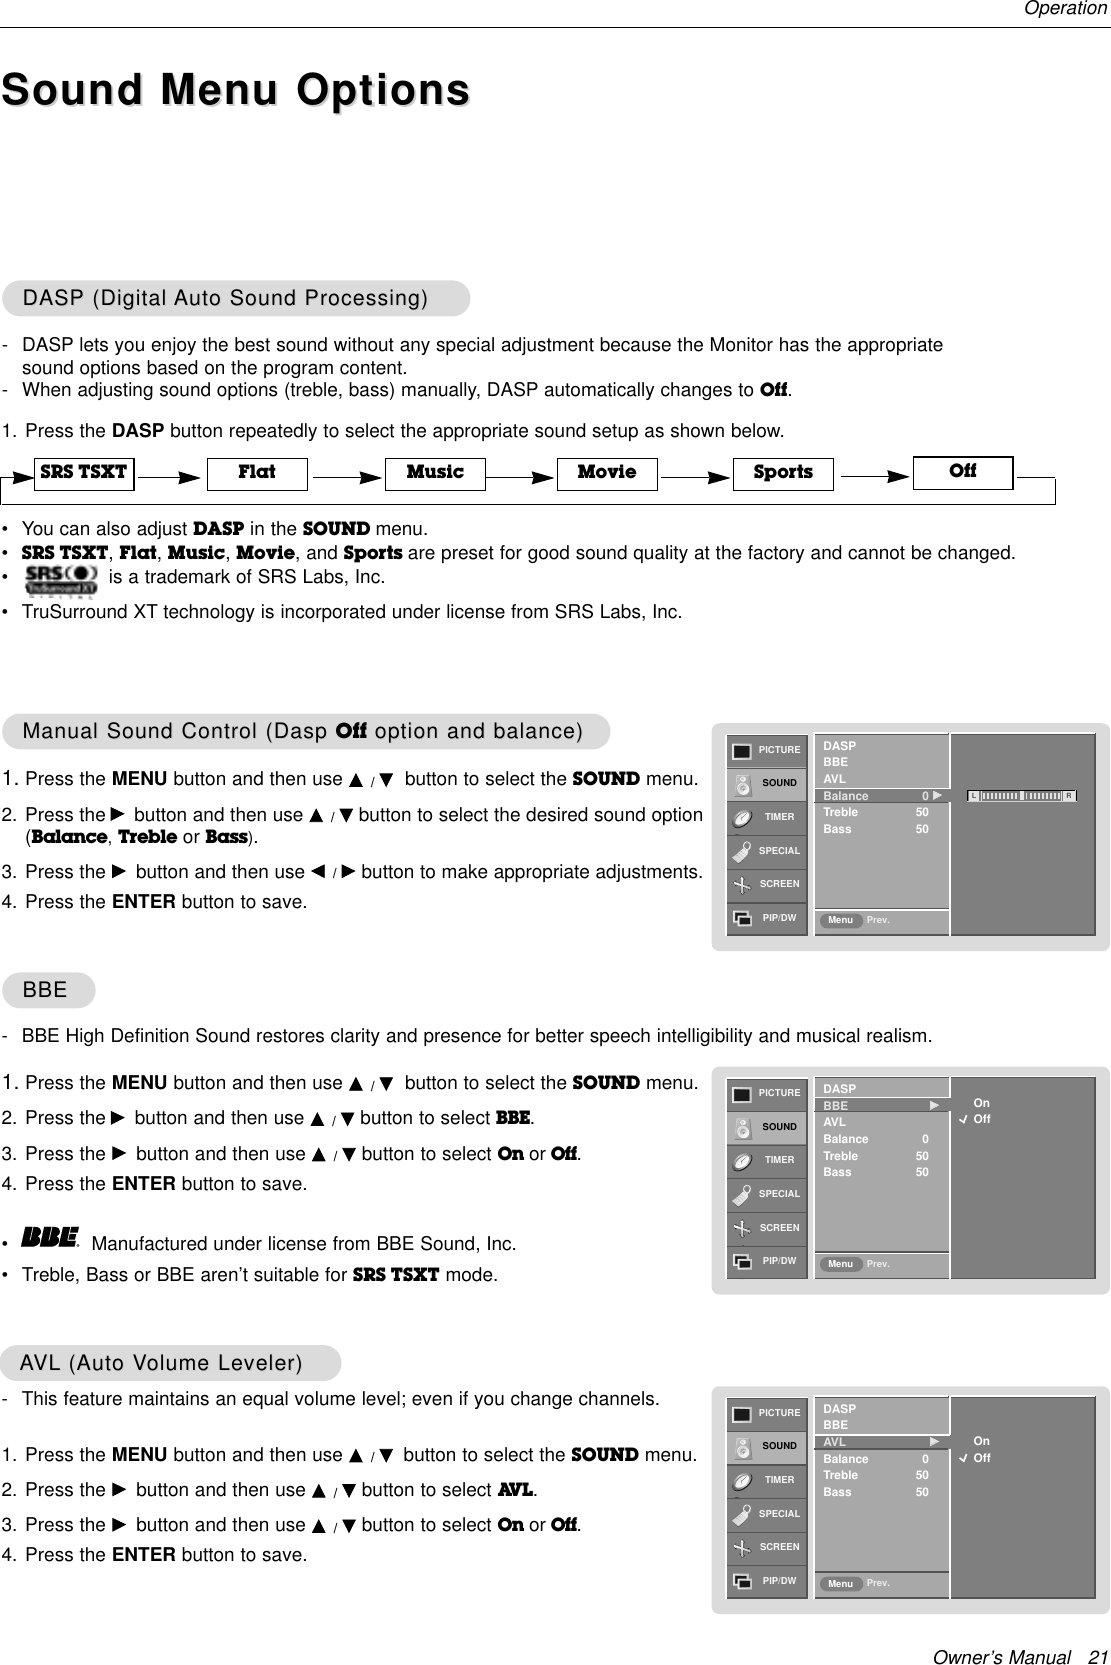 Owner’s Manual   21OperationOffSound Menu OptionsSound Menu Options1. Press the DASP button repeatedly to select the appropriate sound setup as shown below.DASPDASP (Digital (Digital Auto Sound Processing)Auto Sound Processing)1. Press the MENU button and then use D / Ebutton to select the SOUND menu.2. Press the Gbutton and then use D / Ebutton to select BBE. 3. Press the Gbutton and then use D / Ebutton to select On or Off.4. Press the ENTER button to save.BBEBBE- DASP lets you enjoy the best sound without any special adjustment because the Monitor has the appropriatesound options based on the program content.- When adjusting sound options (treble, bass) manually, DASP automatically changes to Off.- This feature maintains an equal volume level; even if you change channels.1. Press the MENU button and then use D / Ebutton to select the SOUND menu.2. Press the Gbutton and then use D / Ebutton to select AV L . 3. Press the Gbutton and then use D / Ebutton to select On or Off.4. Press the ENTER button to save.AAVLVL (Auto V(Auto Volume Leveler)olume Leveler)SRS TSXT Flat Music Movie SportsPICTURESOUNDTIMERSPECIALSCREENPIP/DW Prev.MenuOnOffDASPBBE  GGAVLBalance 0Treble 50Bass 50PICTURESOUNDTIMERSPECIALSCREENPIP/DW Prev.MenuOnOffDASPBBEAVL GGBalance 0Treble 50Bass 50PICTURESOUNDTIMERSPECIALSCREENPIP/DW Prev.MenuDASPBBEAVLBalance 0 GGTreble 50Bass 50L R1. Press the MENU button and then use D / Ebutton to select the SOUND menu.2. Press the Gbutton and then use D / Ebutton to select the desired sound option(Balance,Treble or Bass). 3. Press the Gbutton and then use F / Gbutton to make appropriate adjustments.4. Press the ENTER button to save.Manual Sound Control (Dasp Manual Sound Control (Dasp Off option and balance)option and balance)- BBE High Definition Sound restores clarity and presence for better speech intelligibility and musical realism.•Manufactured under license from BBE Sound, Inc.•Treble, Bass or BBE aren’t suitable for SRS TSXT mode.•You can also adjust DASP in the SOUND menu.•SRS TSXT, Flat, Music, Movie, and Sports are preset for good sound quality at the factory and cannot be changed.•is a trademark of SRS Labs, Inc.•TruSurround XT technology is incorporated under license from SRS Labs, Inc.